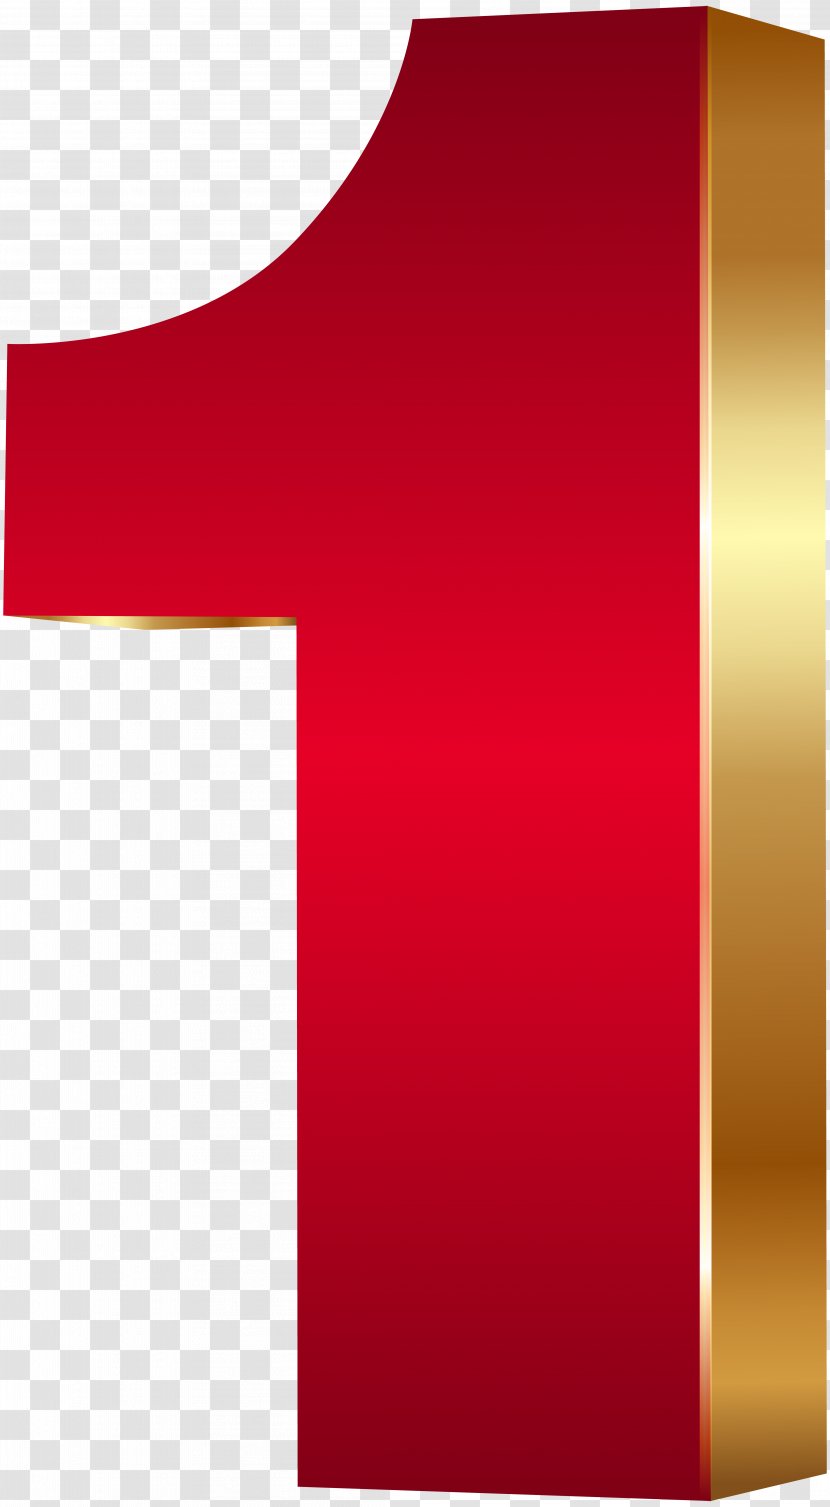 Clip Art - Museum - 3D Number One Red Gold Image Transparent PNG